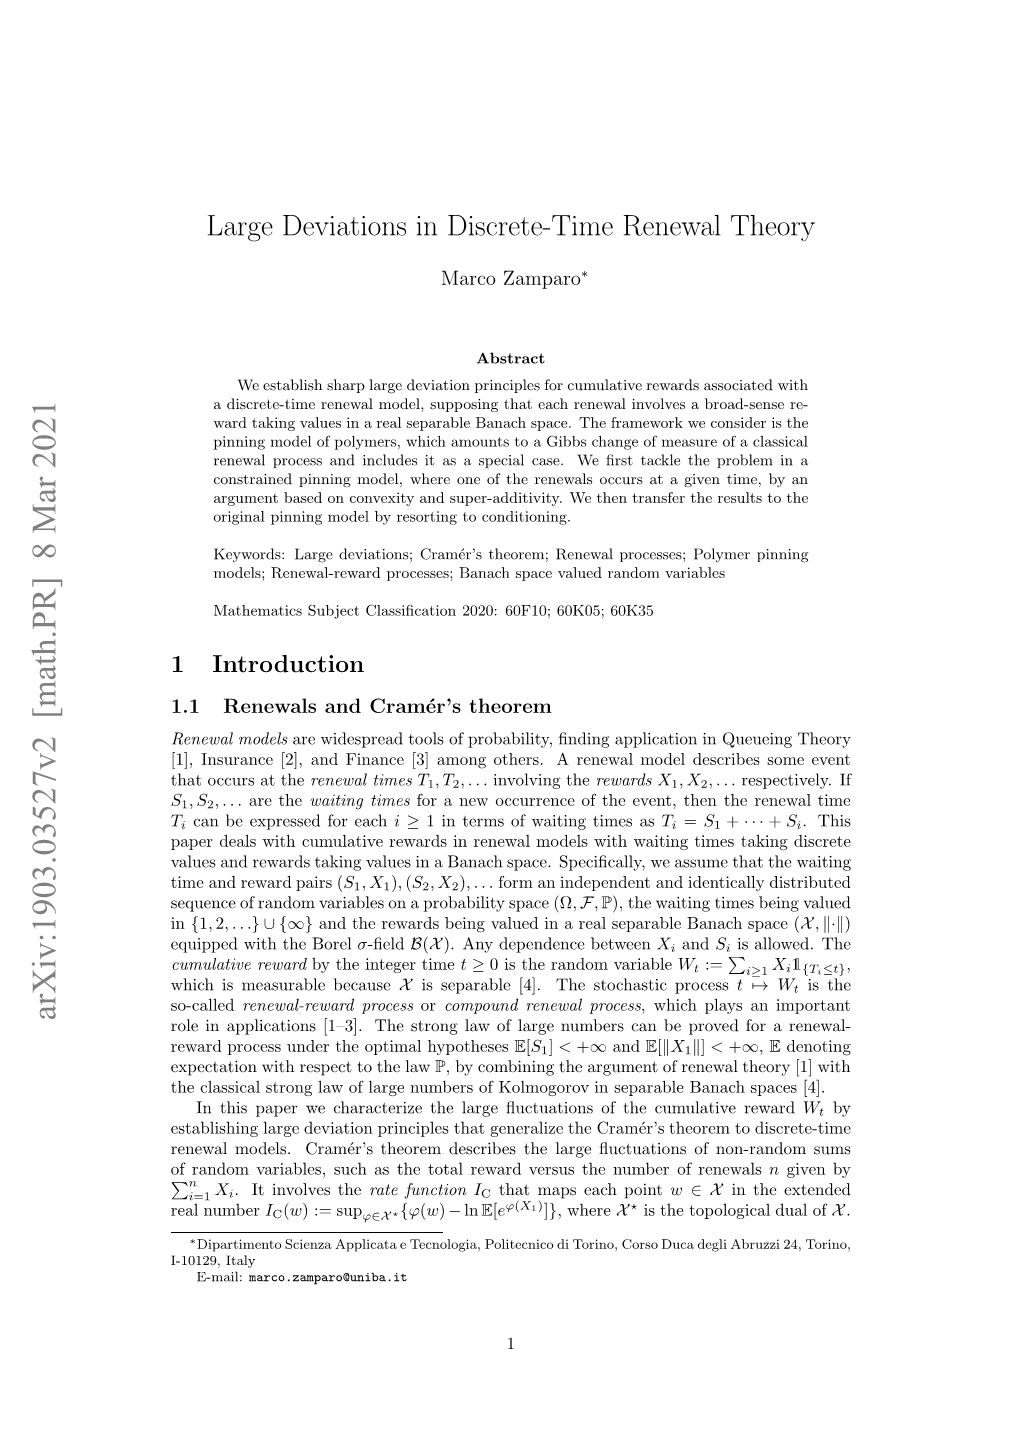 Large Deviations in Discrete-Time Renewal Theory